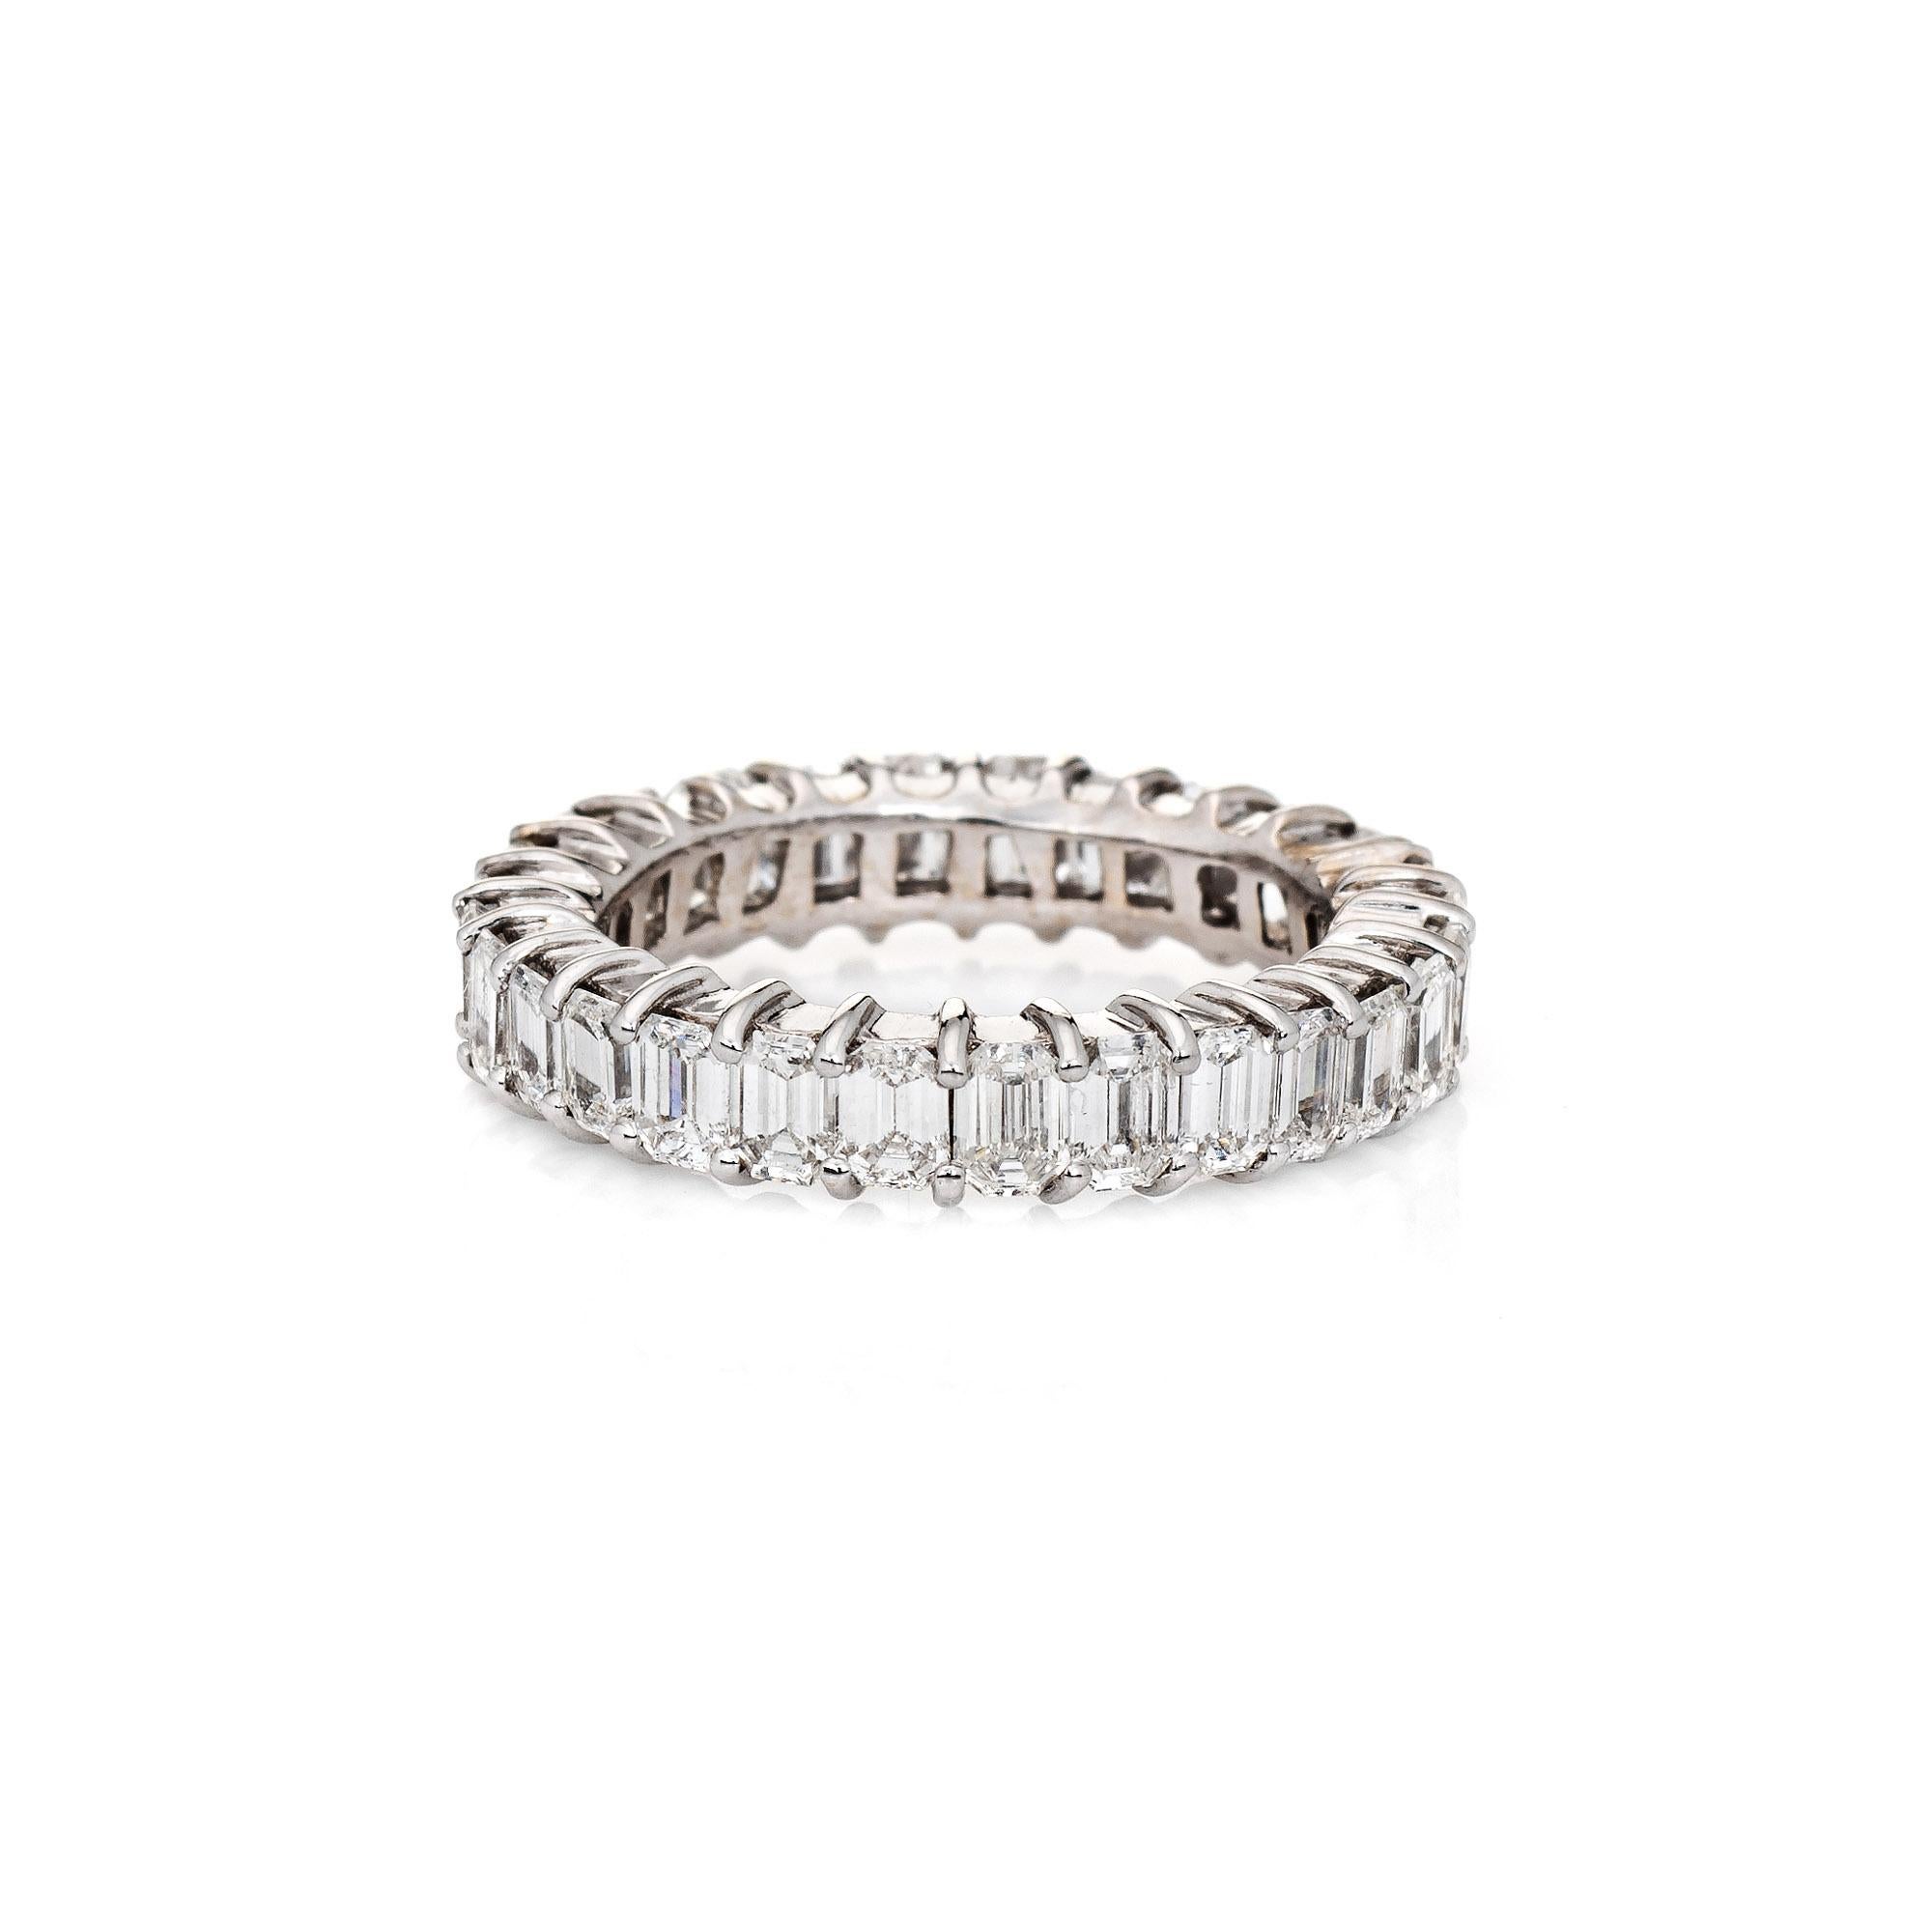 Elegant vintage diamond eternity ring (circa 1980s to 1990s), crafted in 18k white gold. 

27 single emerald cut diamonds are estimated at 0.10 carats each and total an estimated 2.70 carats (estimated at G-H color and VS2-SI1 clarity).

The ring